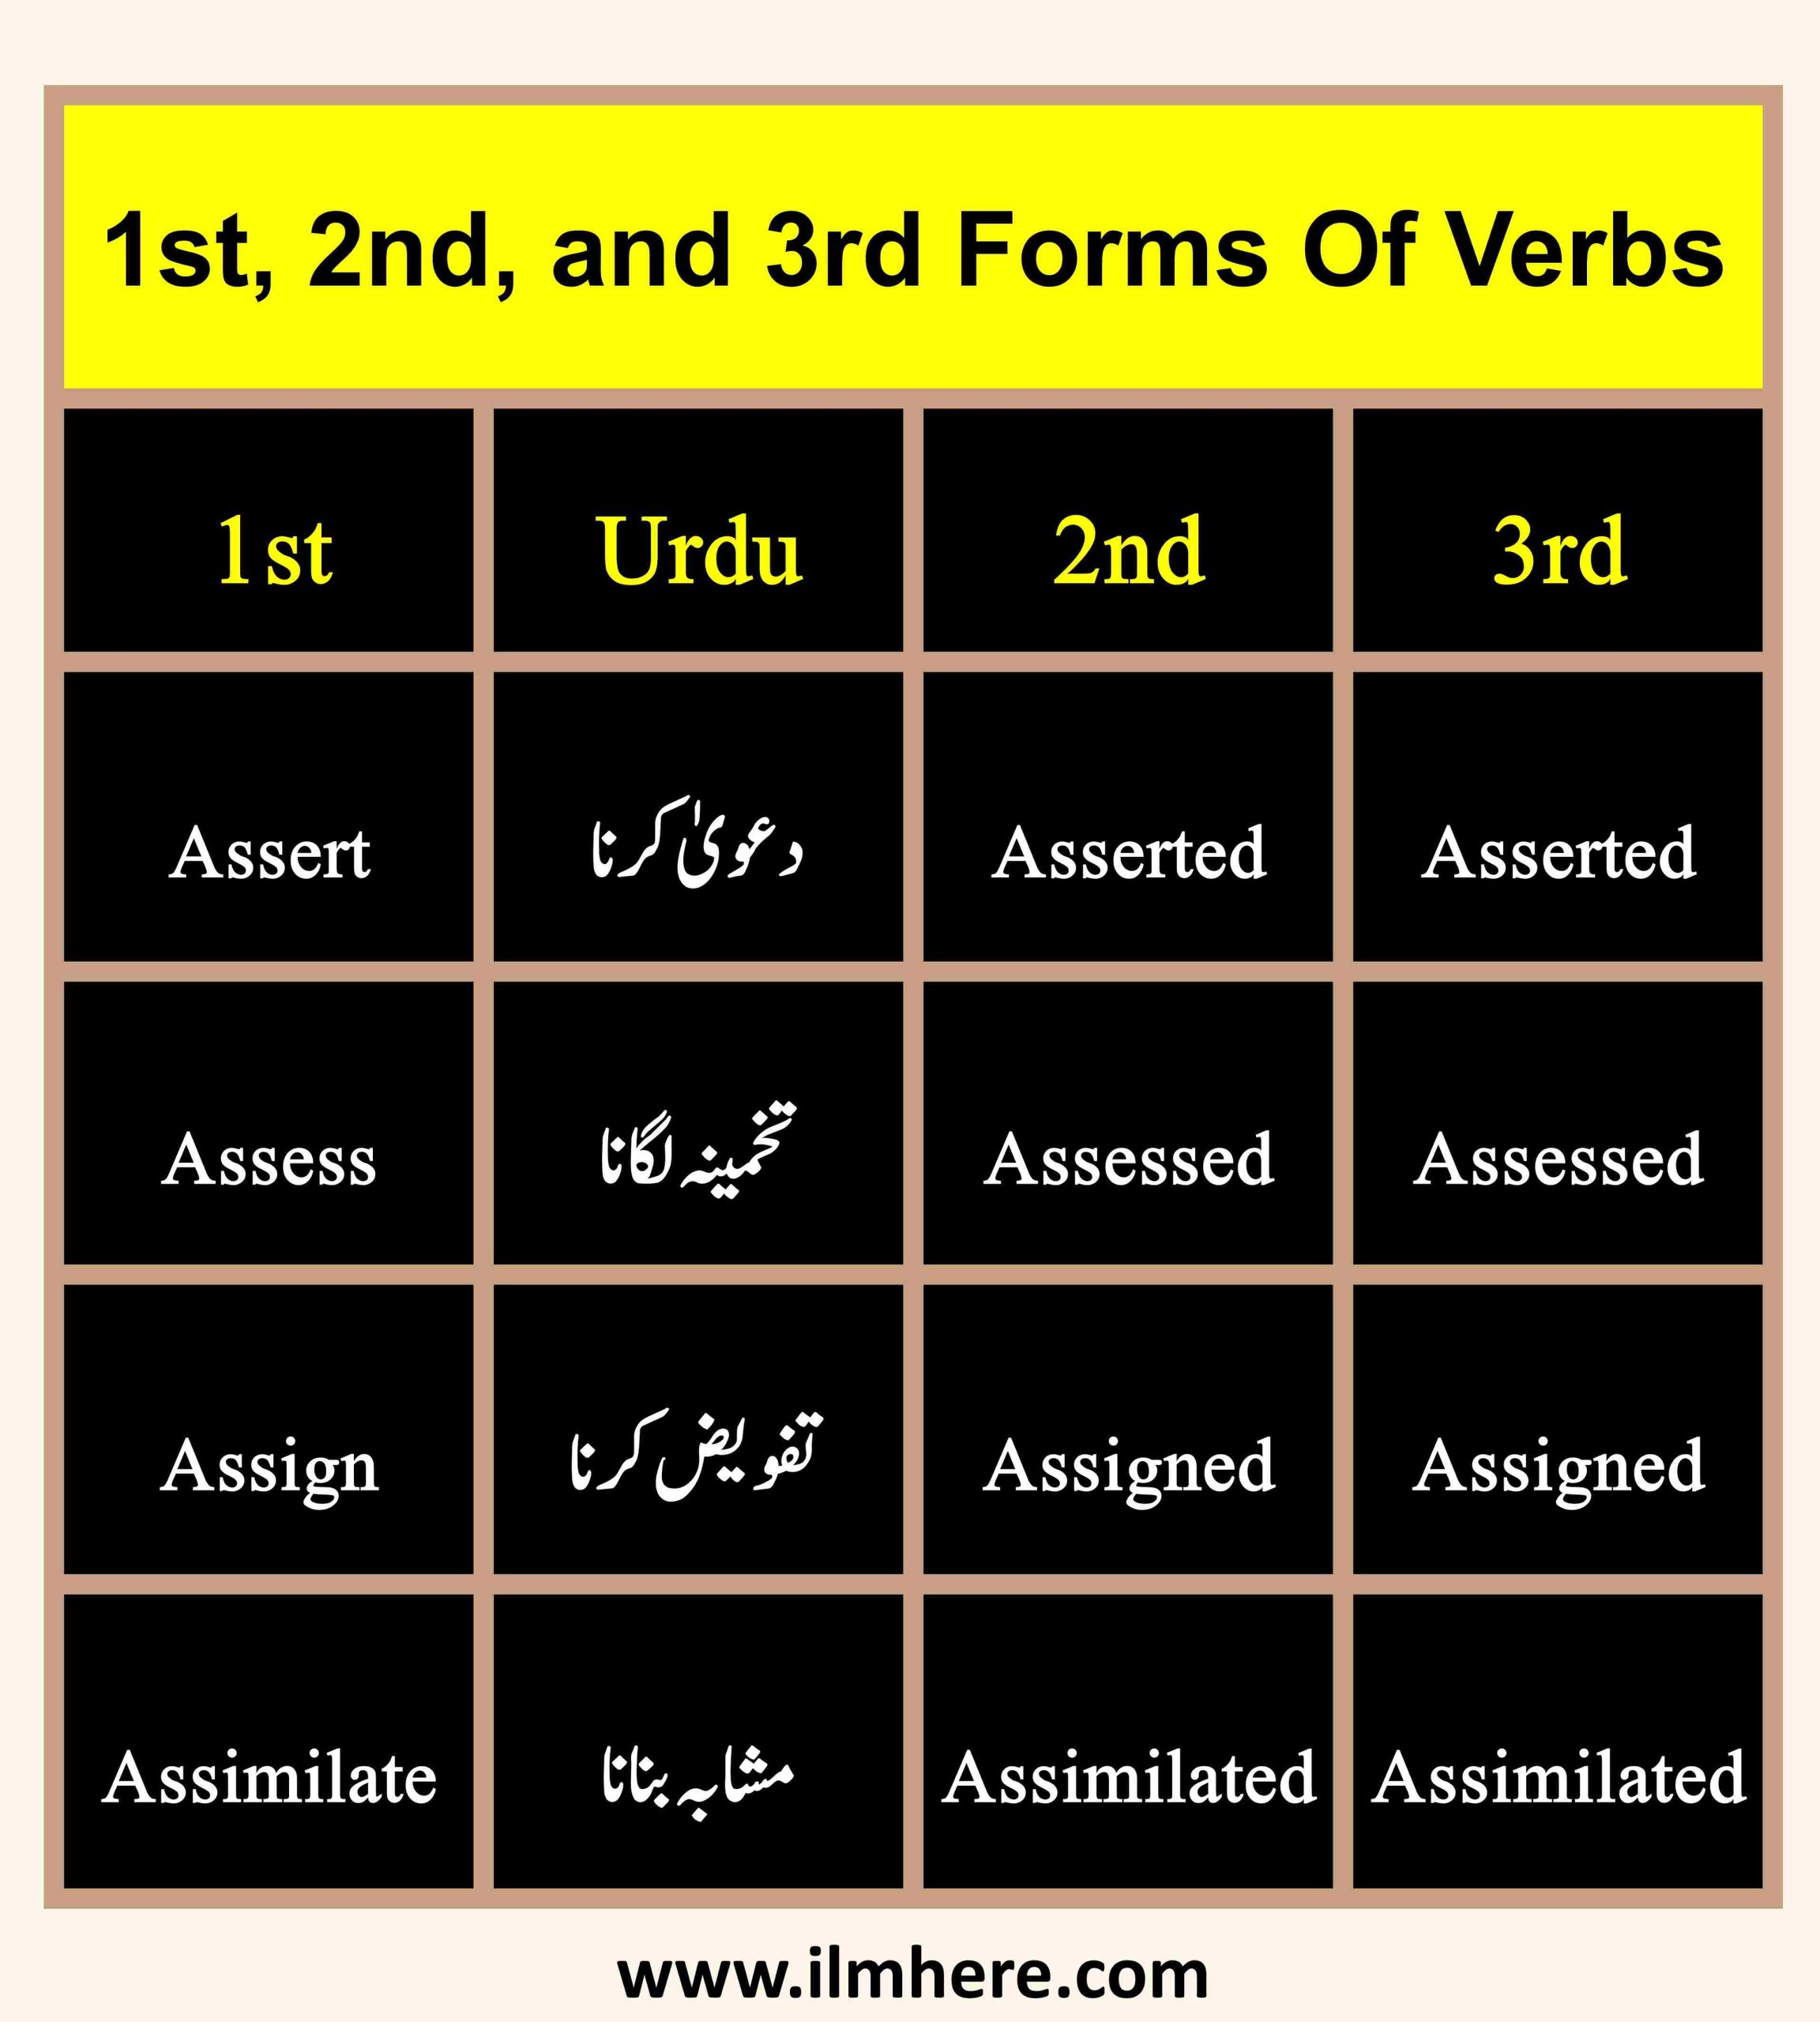 1st, 2nd, and 3rd Forms Of Verbs